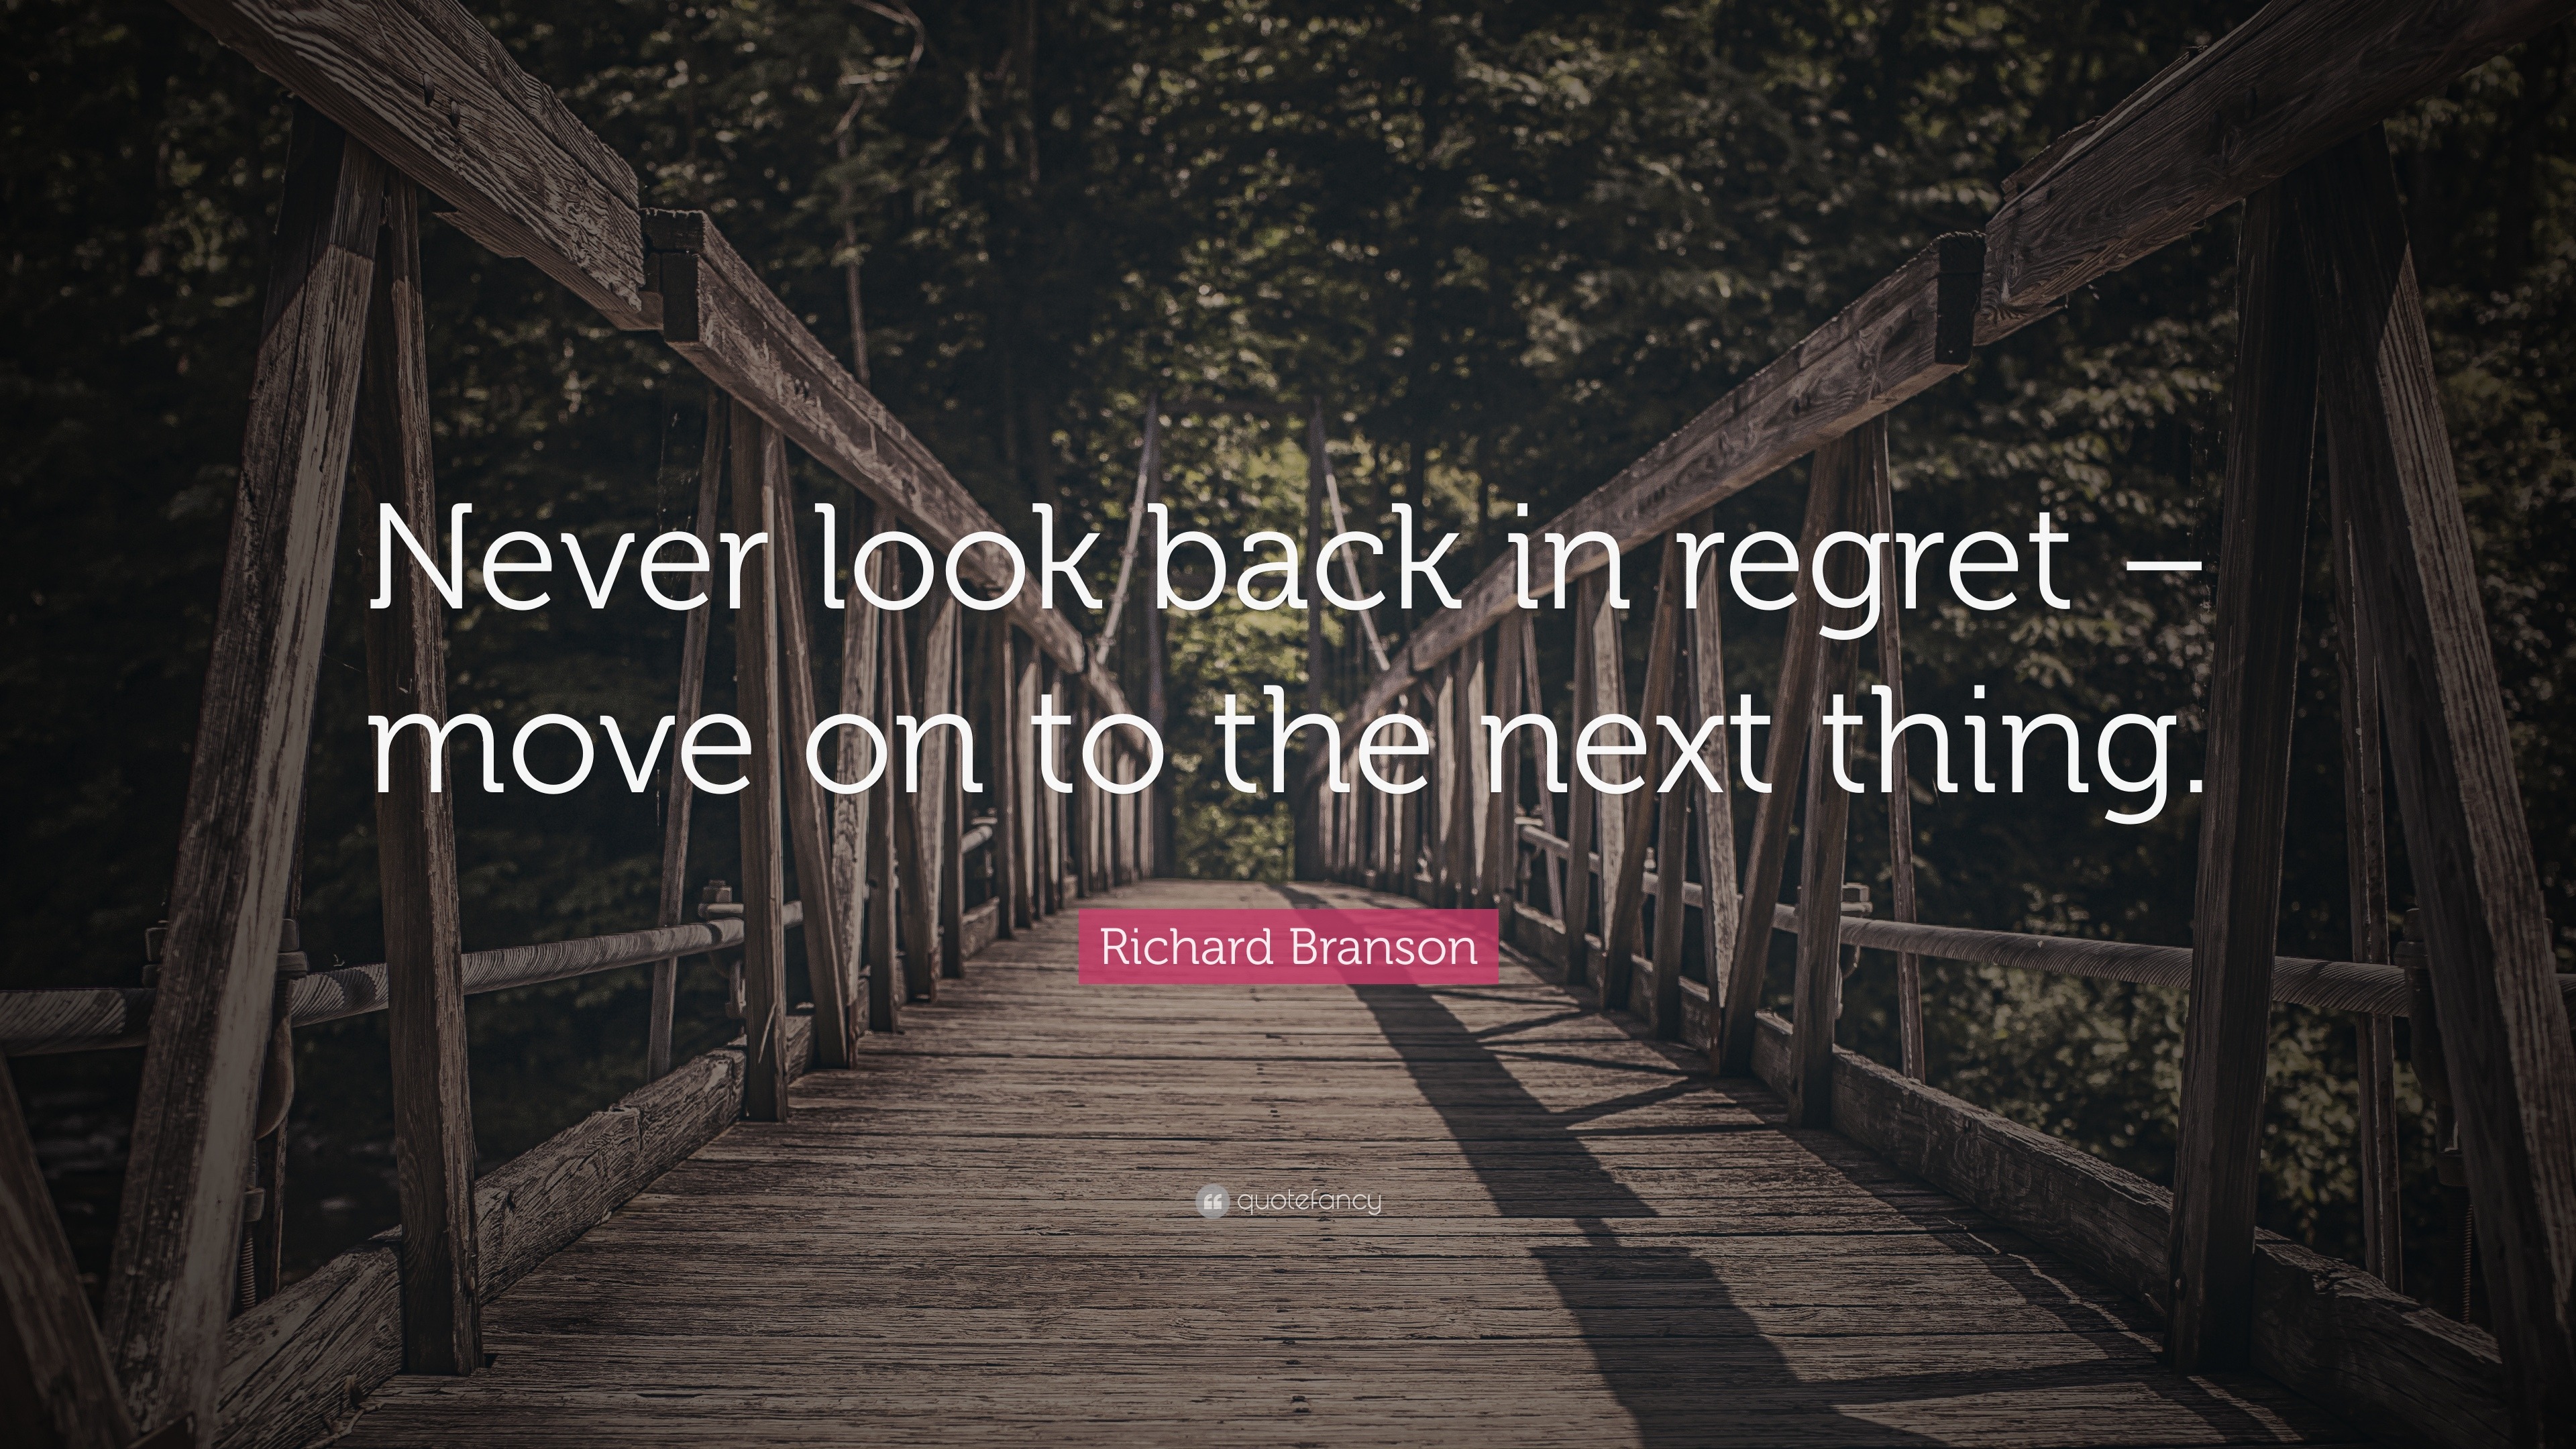 TOP 10 REGRET AND MISTAKE QUOTES